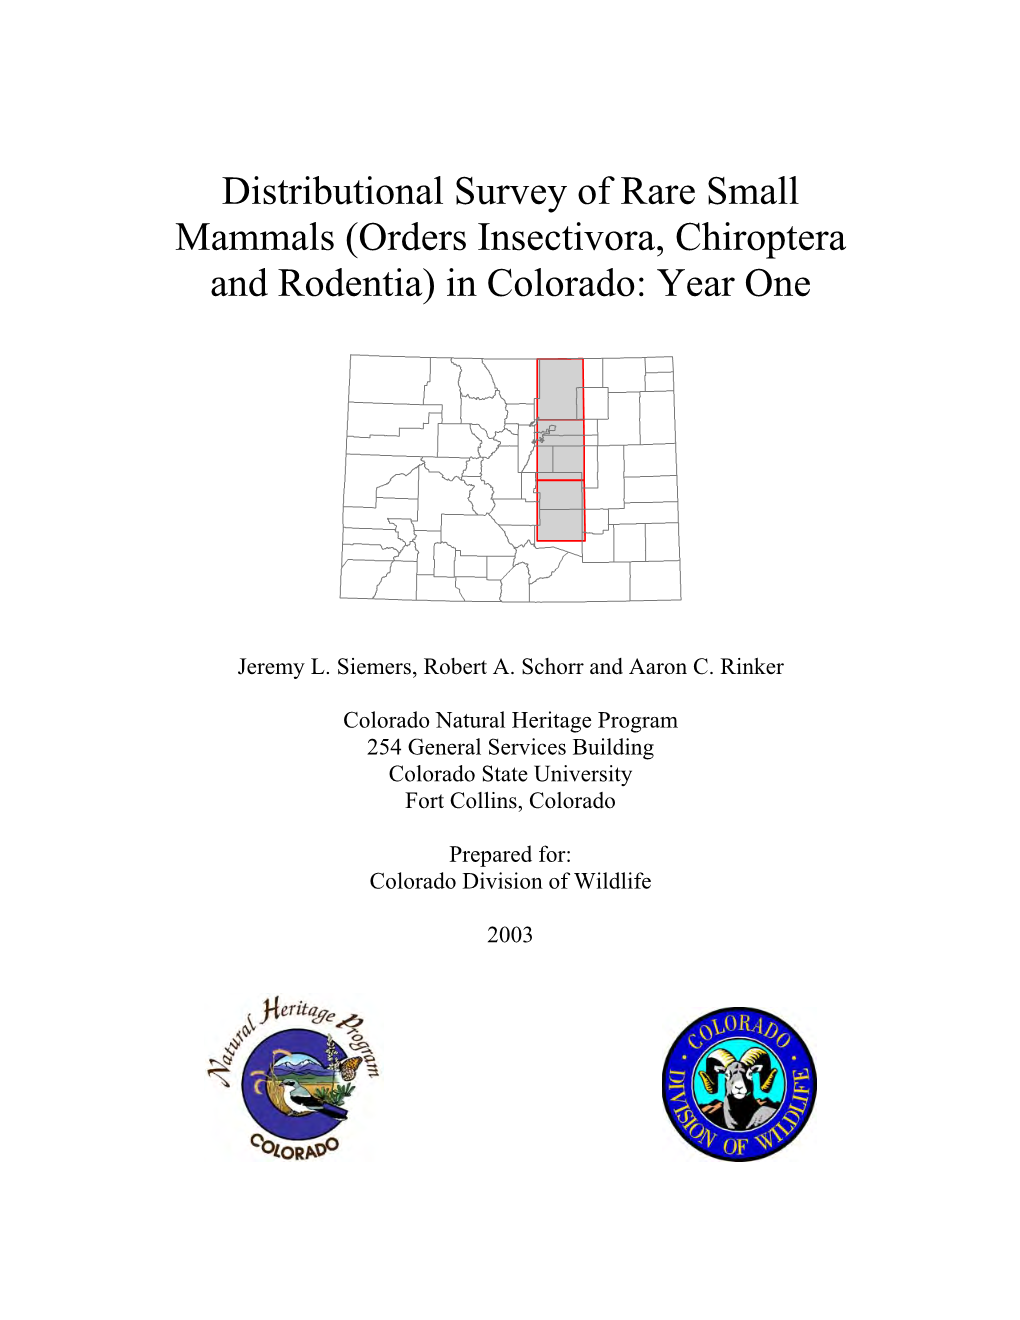 Distributional Survey of Rare Small Mammals (Orders Insectivora, Chiroptera and Rodentia) in Colorado: Year One